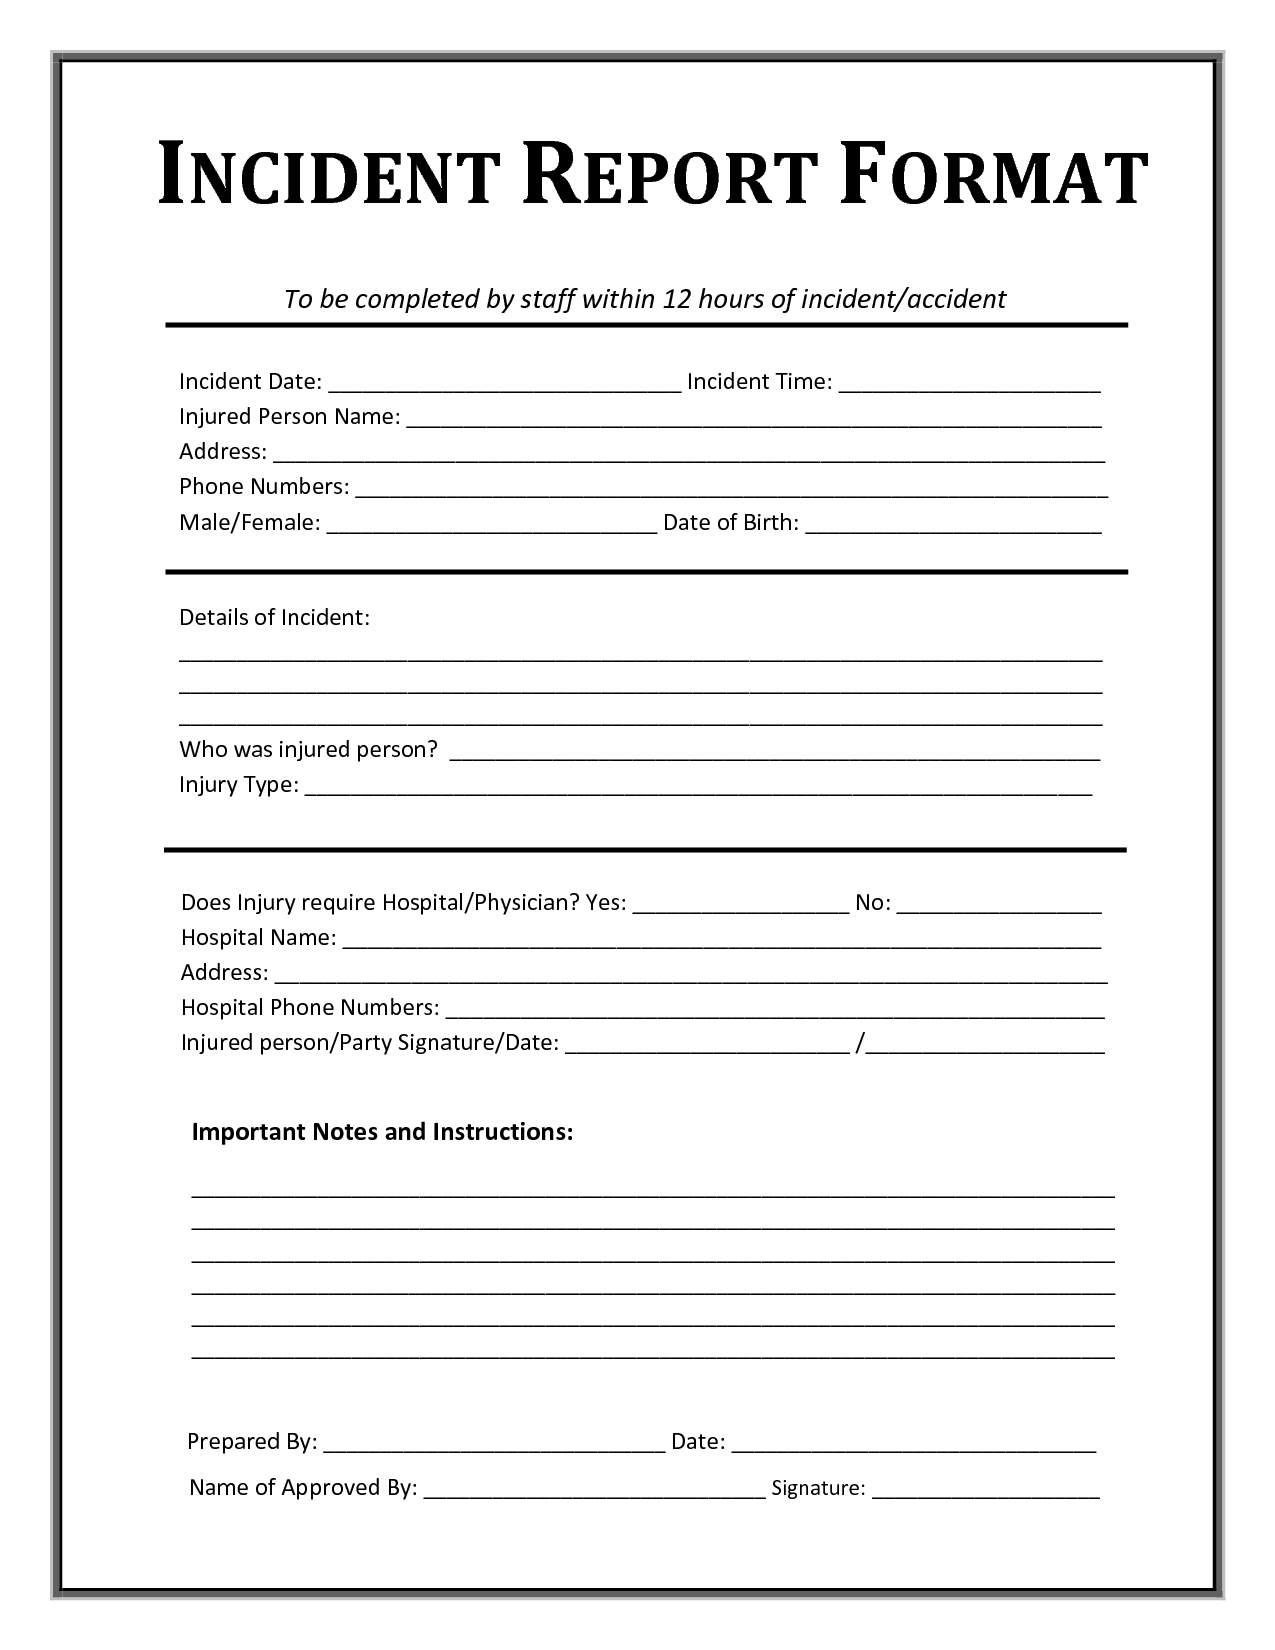 Incident Report Form Template Microsoft Excel  Report Templates intended for Incident Report Template Microsoft